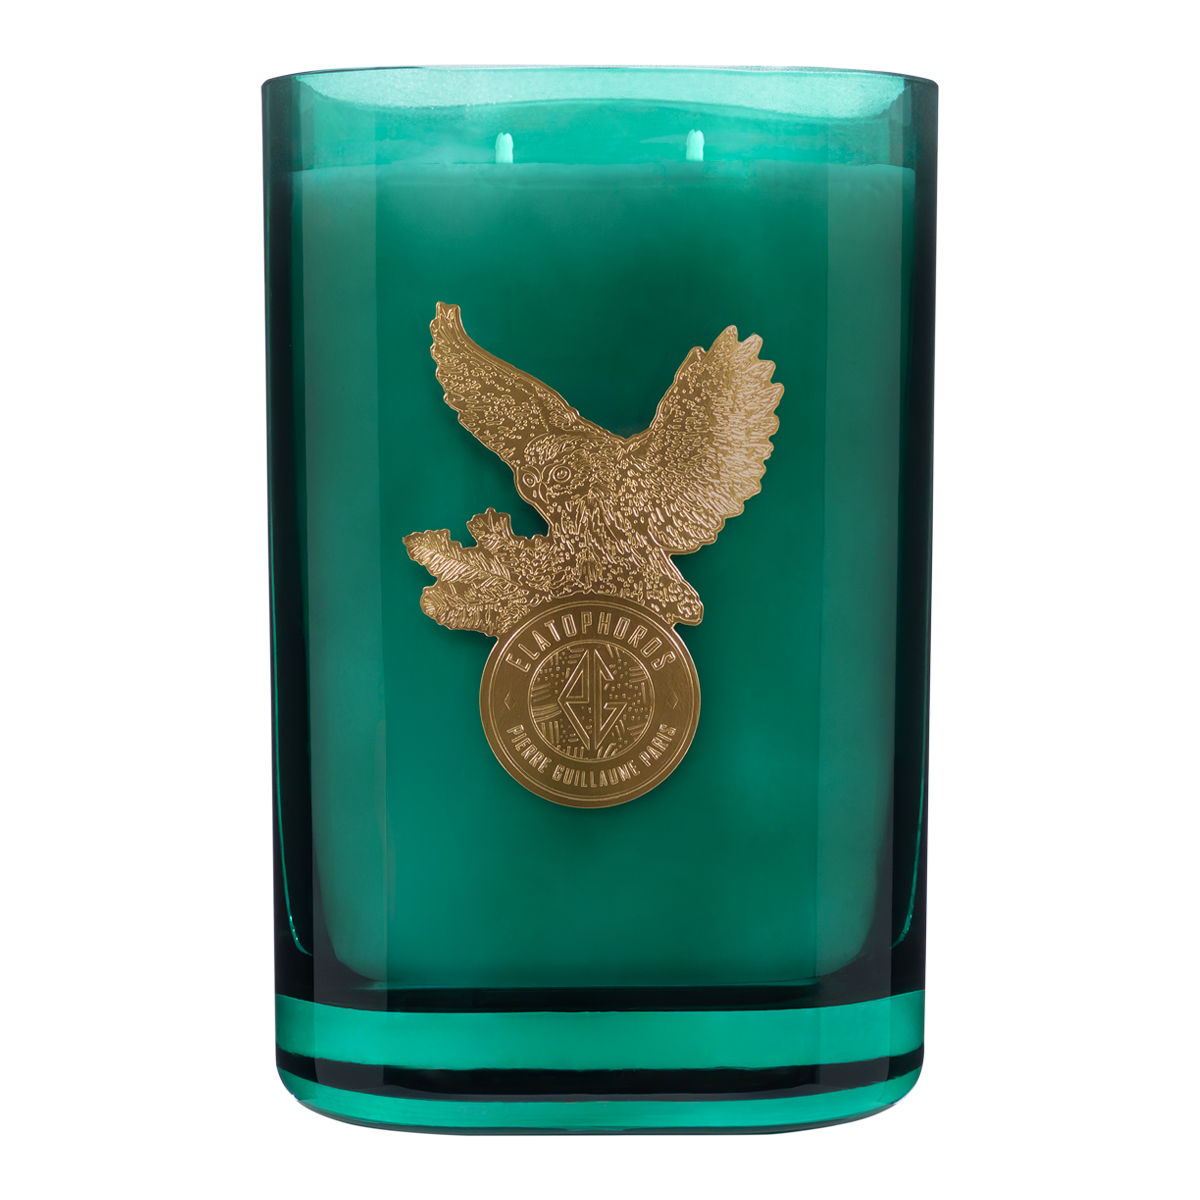 ELATOPHOROS Scented Candle 1,5kg (2023 Edition) - Available from 10th of December